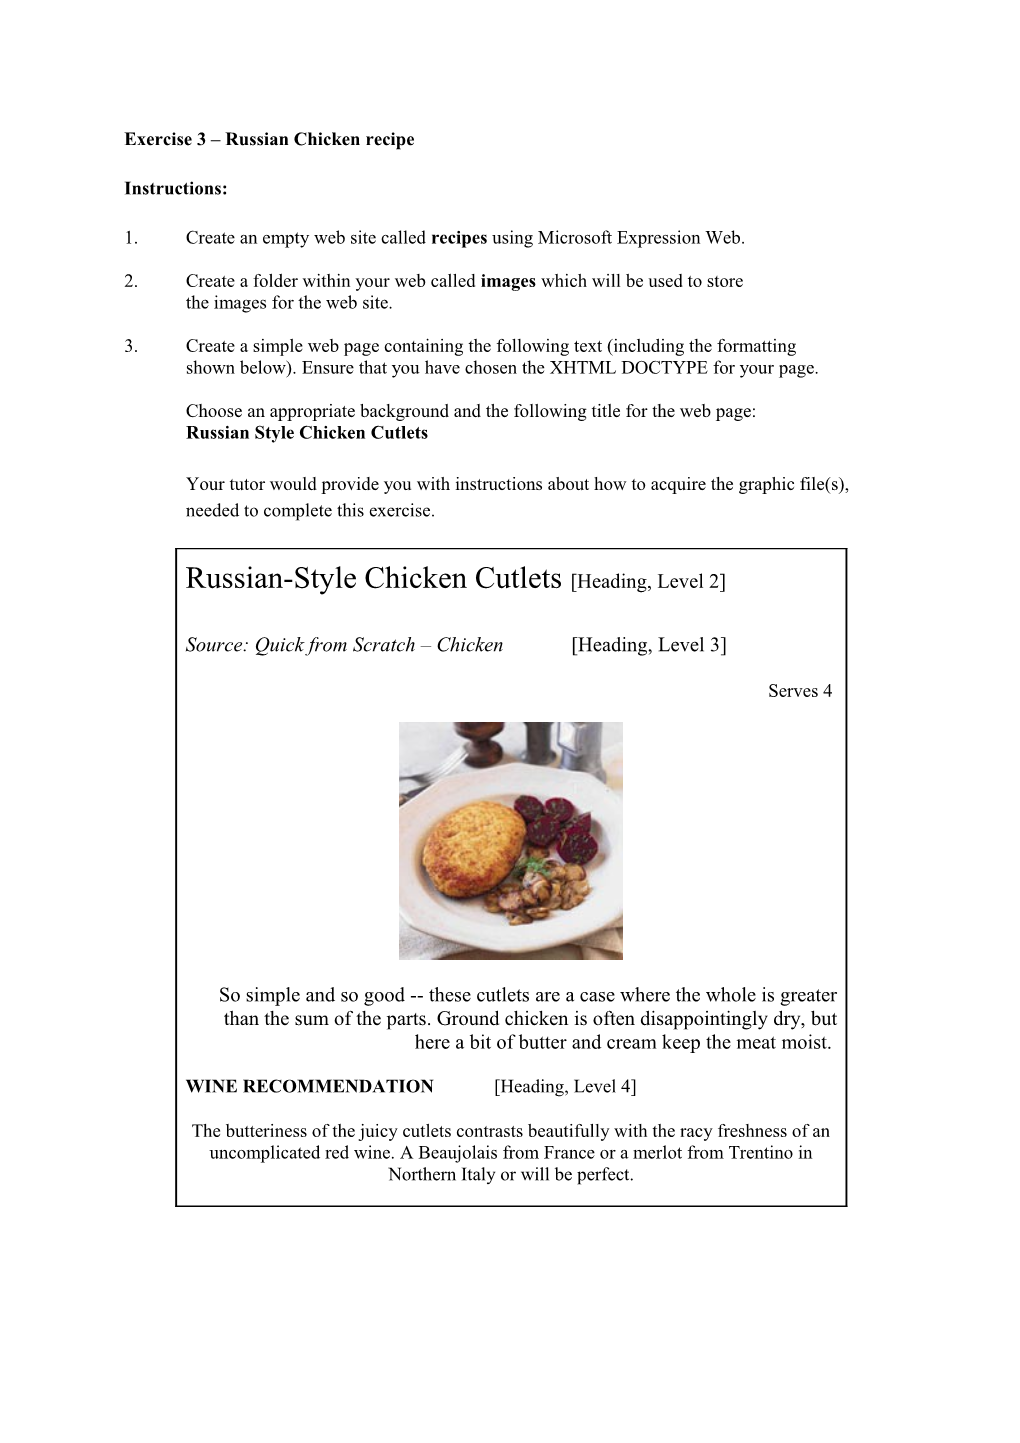 Exercise 3 Russian Chicken Recipe